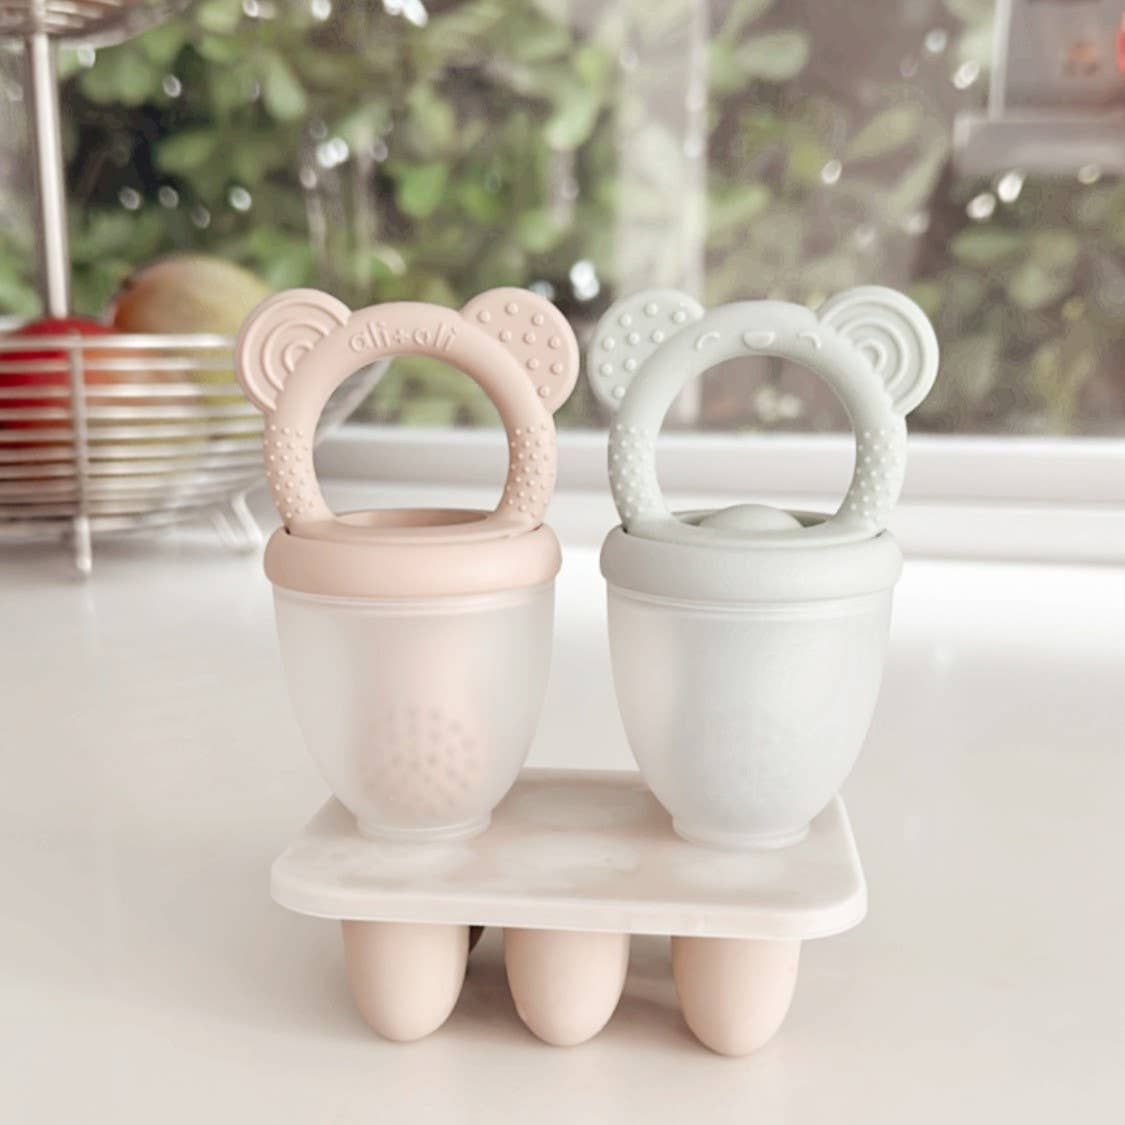 Food & Fruit Pacifier Feeder & Freezer Tray (Mist-Taupe) 3pc